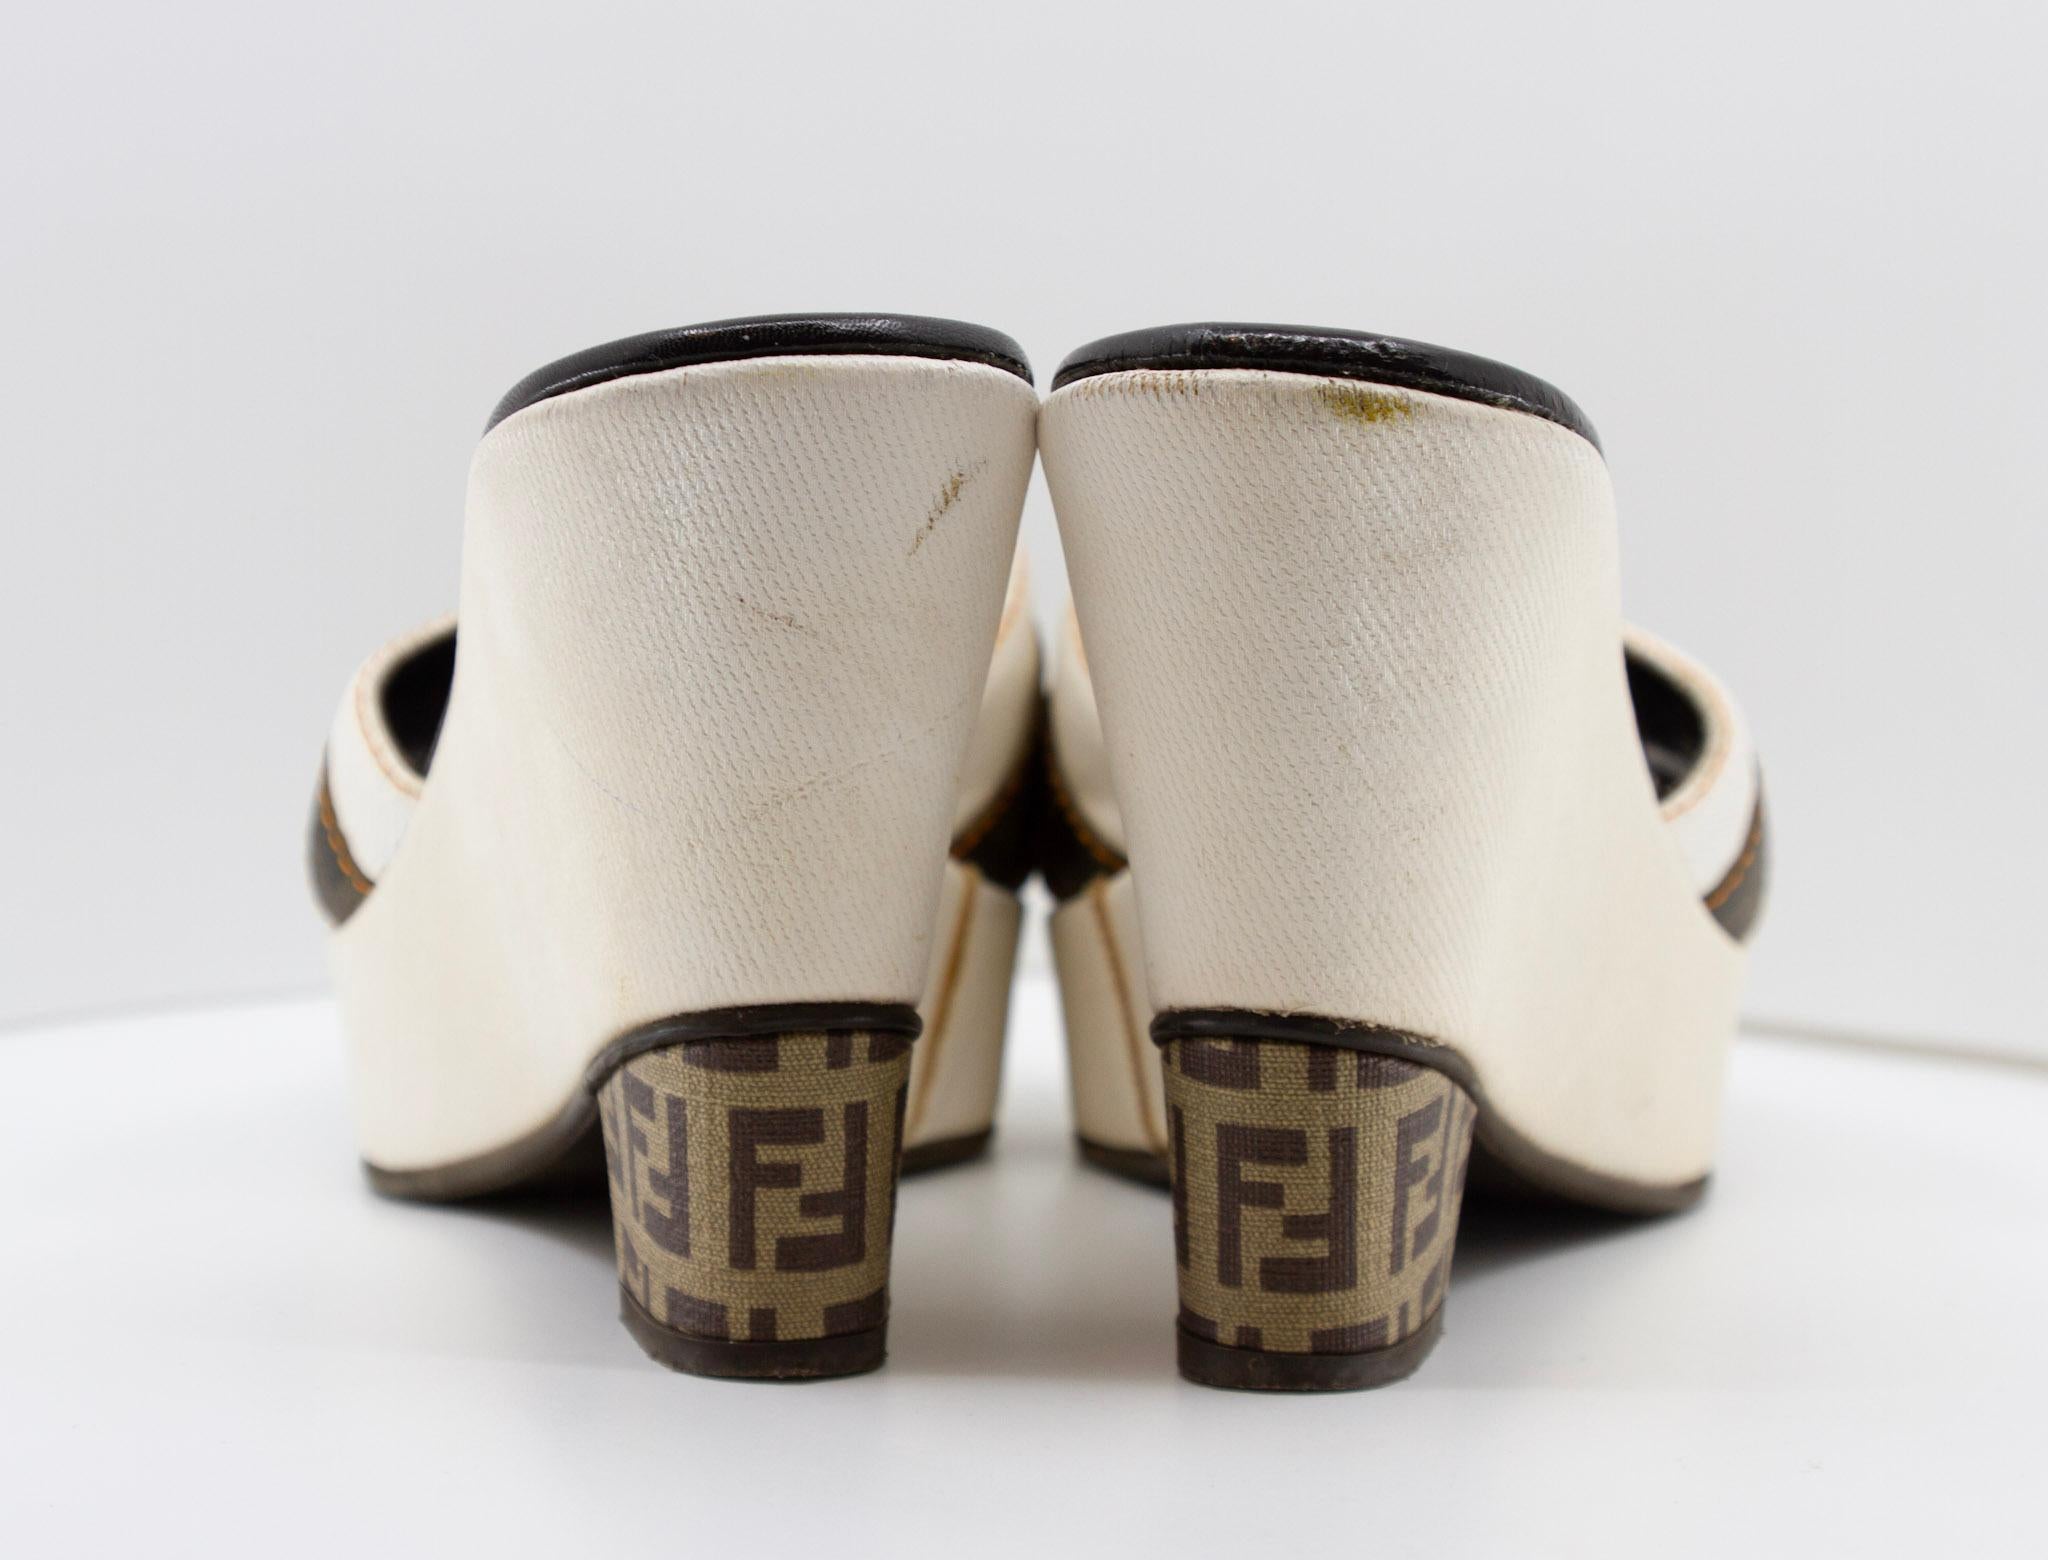 Fendi 2007 Zucca White Canvas FF Monogram Platform Heels  In Excellent Condition For Sale In Kingston, NY